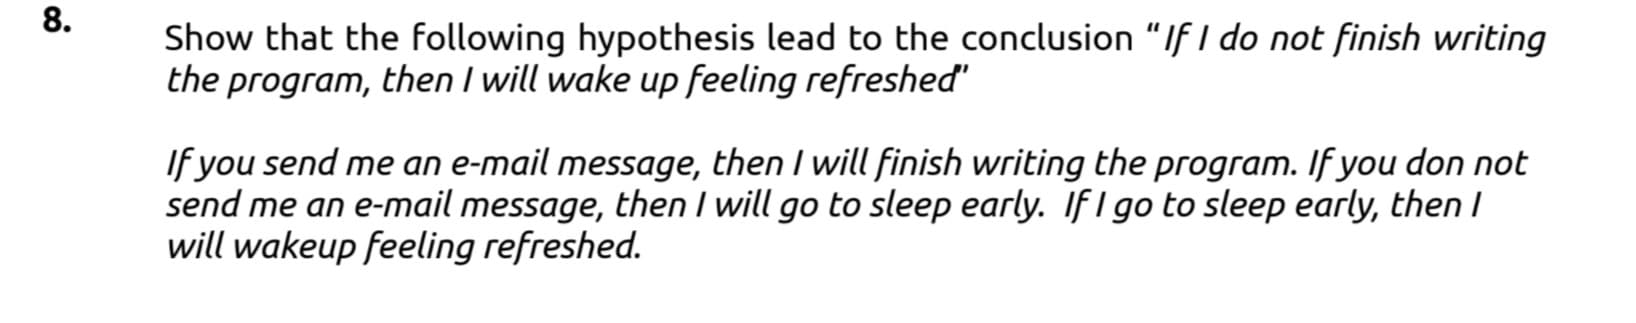 Show that the following hypothesis lead to the conclusion “If I do not finish writing
the program, then I will wake up feeling refreshed"
If you send me an e-mail message, then I will finish writing the program. If you don not
send me an e-mail message, thenI will go to sleep early. If I go to sleep early, then I
will wakeup feeling refreshed.
